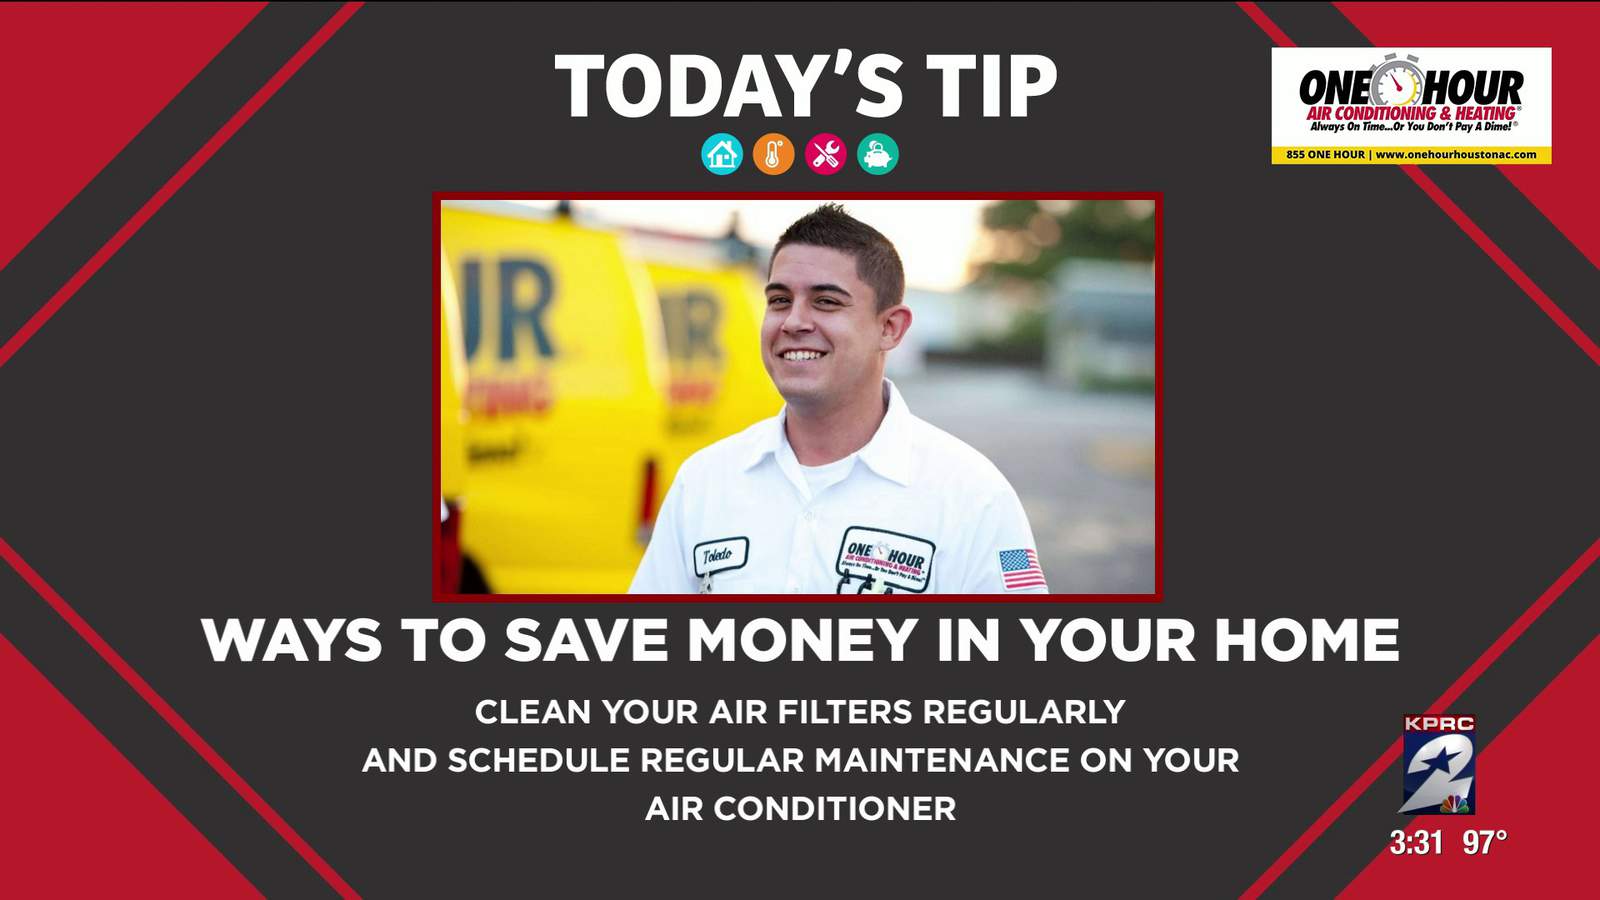 Tip Tuesday: Ways to save money in your home